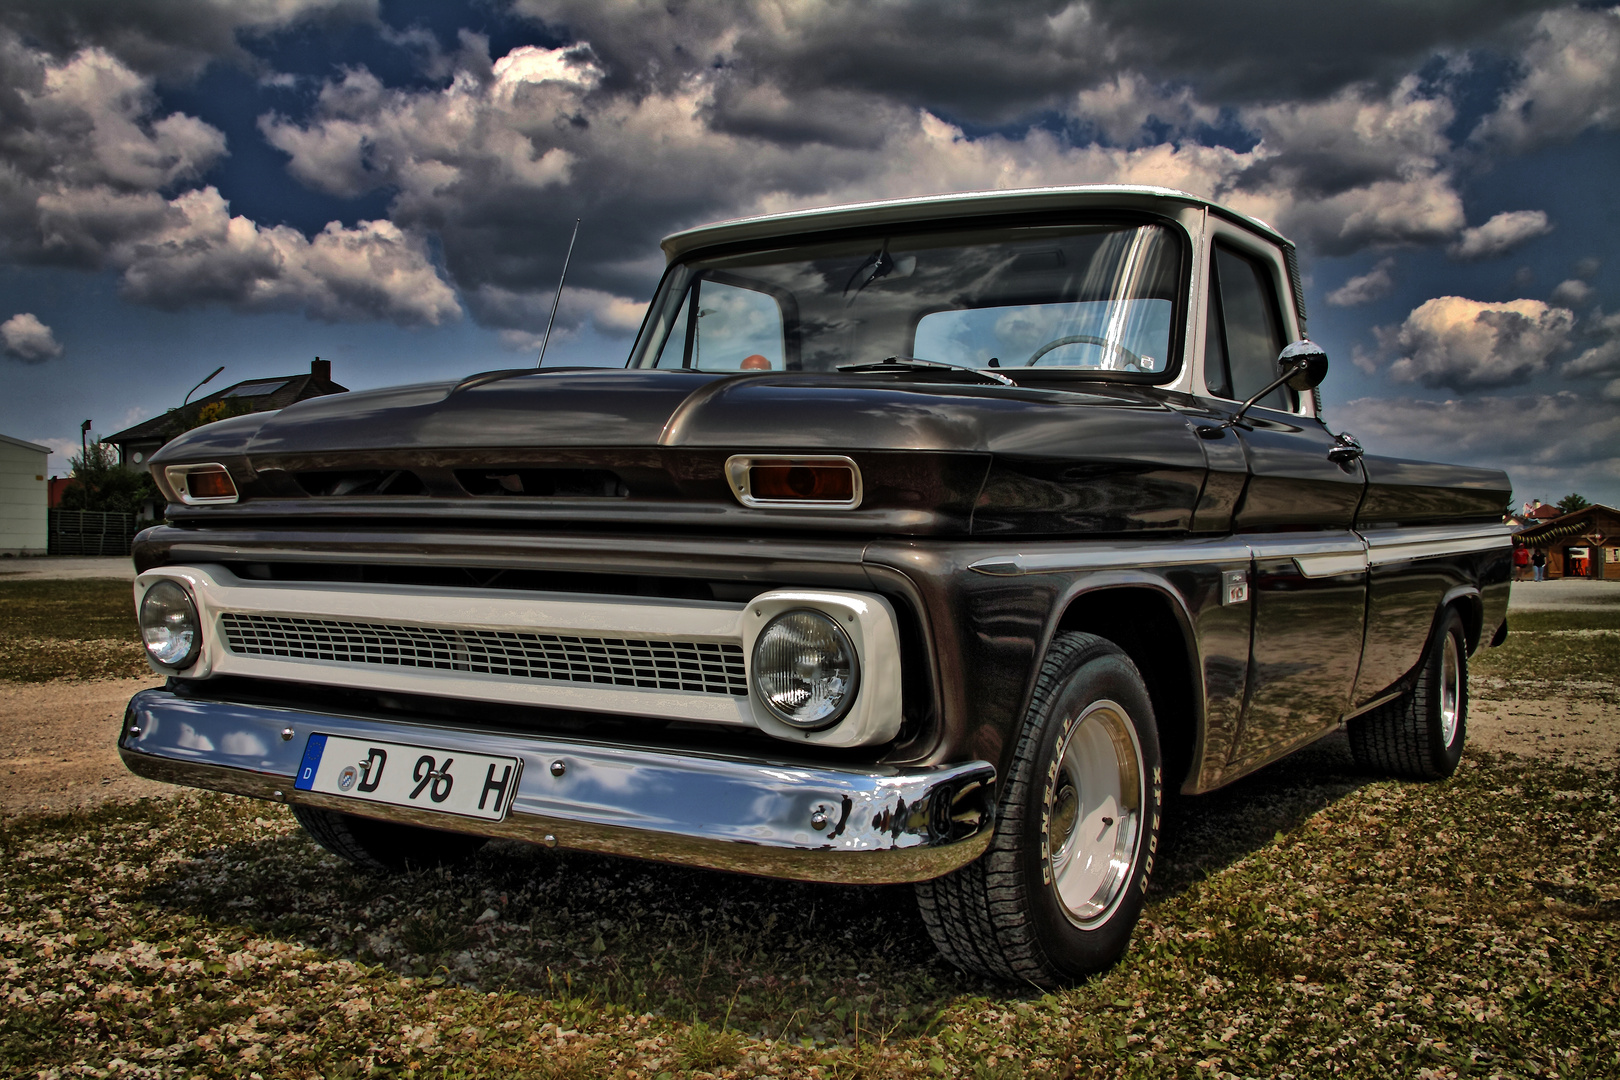 Chevy Pick-up